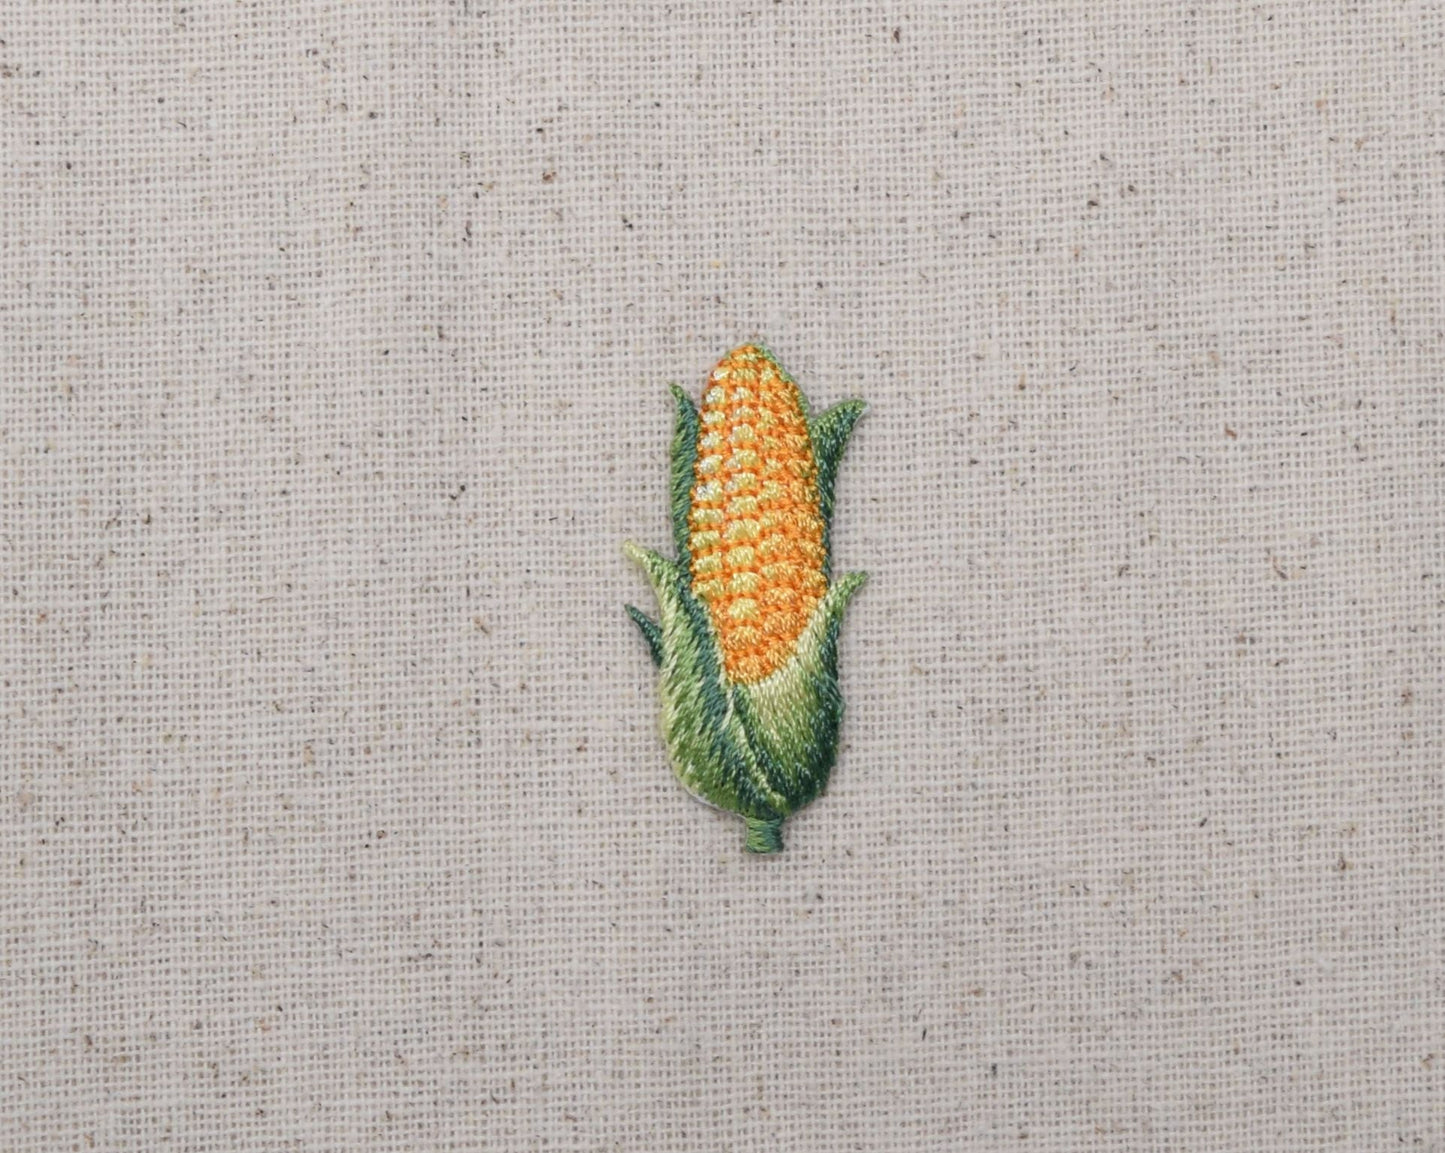 Corn on the Cob - Corn husk - Vegetable - Food - Iron on Applique - Embroidered Patch - 1515811-A